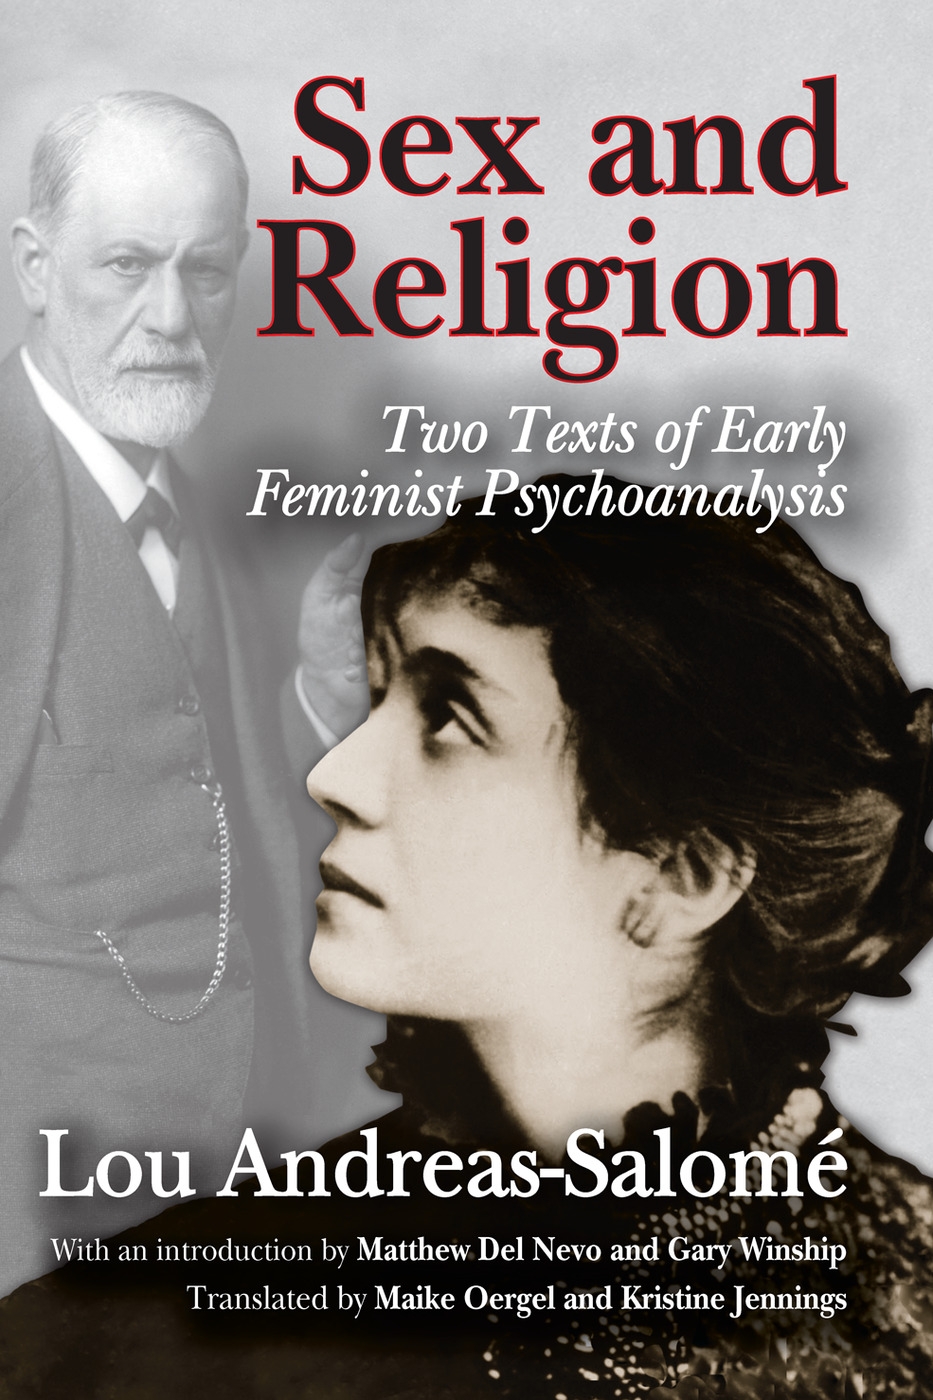 Sex and Religion: Two Texts of Early Feminist Psychoanalysis